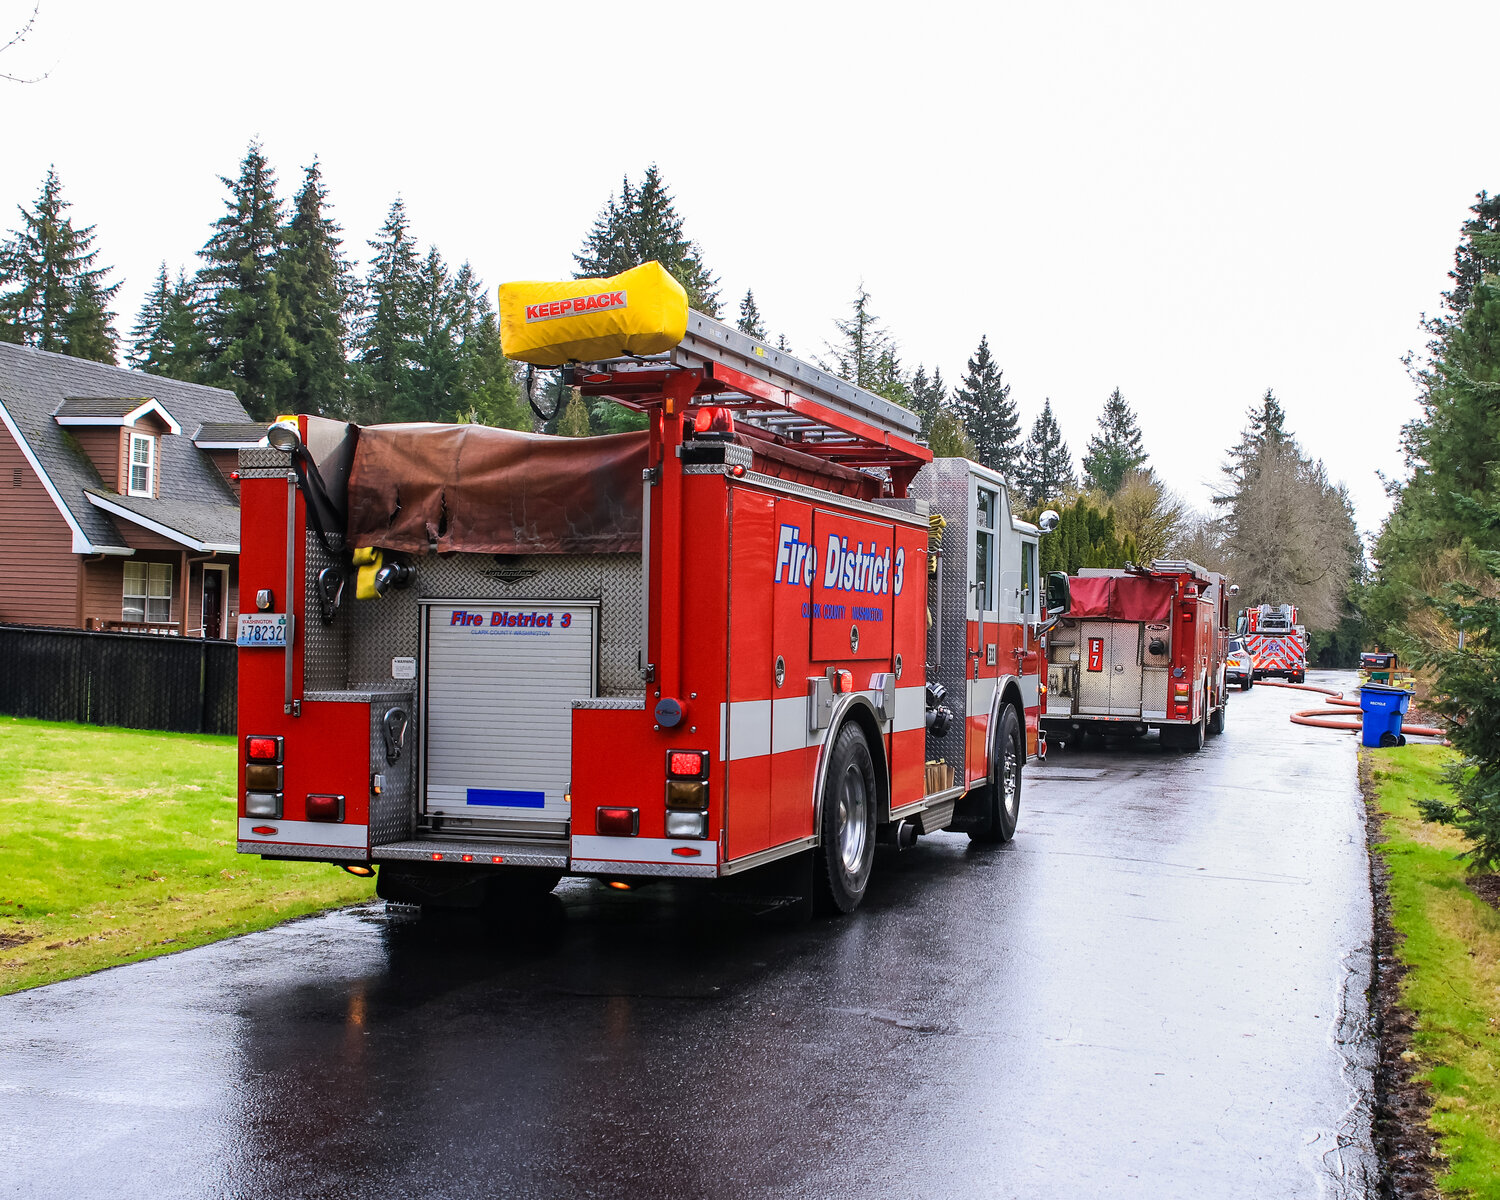 Crews from Clark County Fire District 3 and Clark-Cowlitz Fire Rescue respond to a shop fire in the Meadow Glade area on Feb. 21.